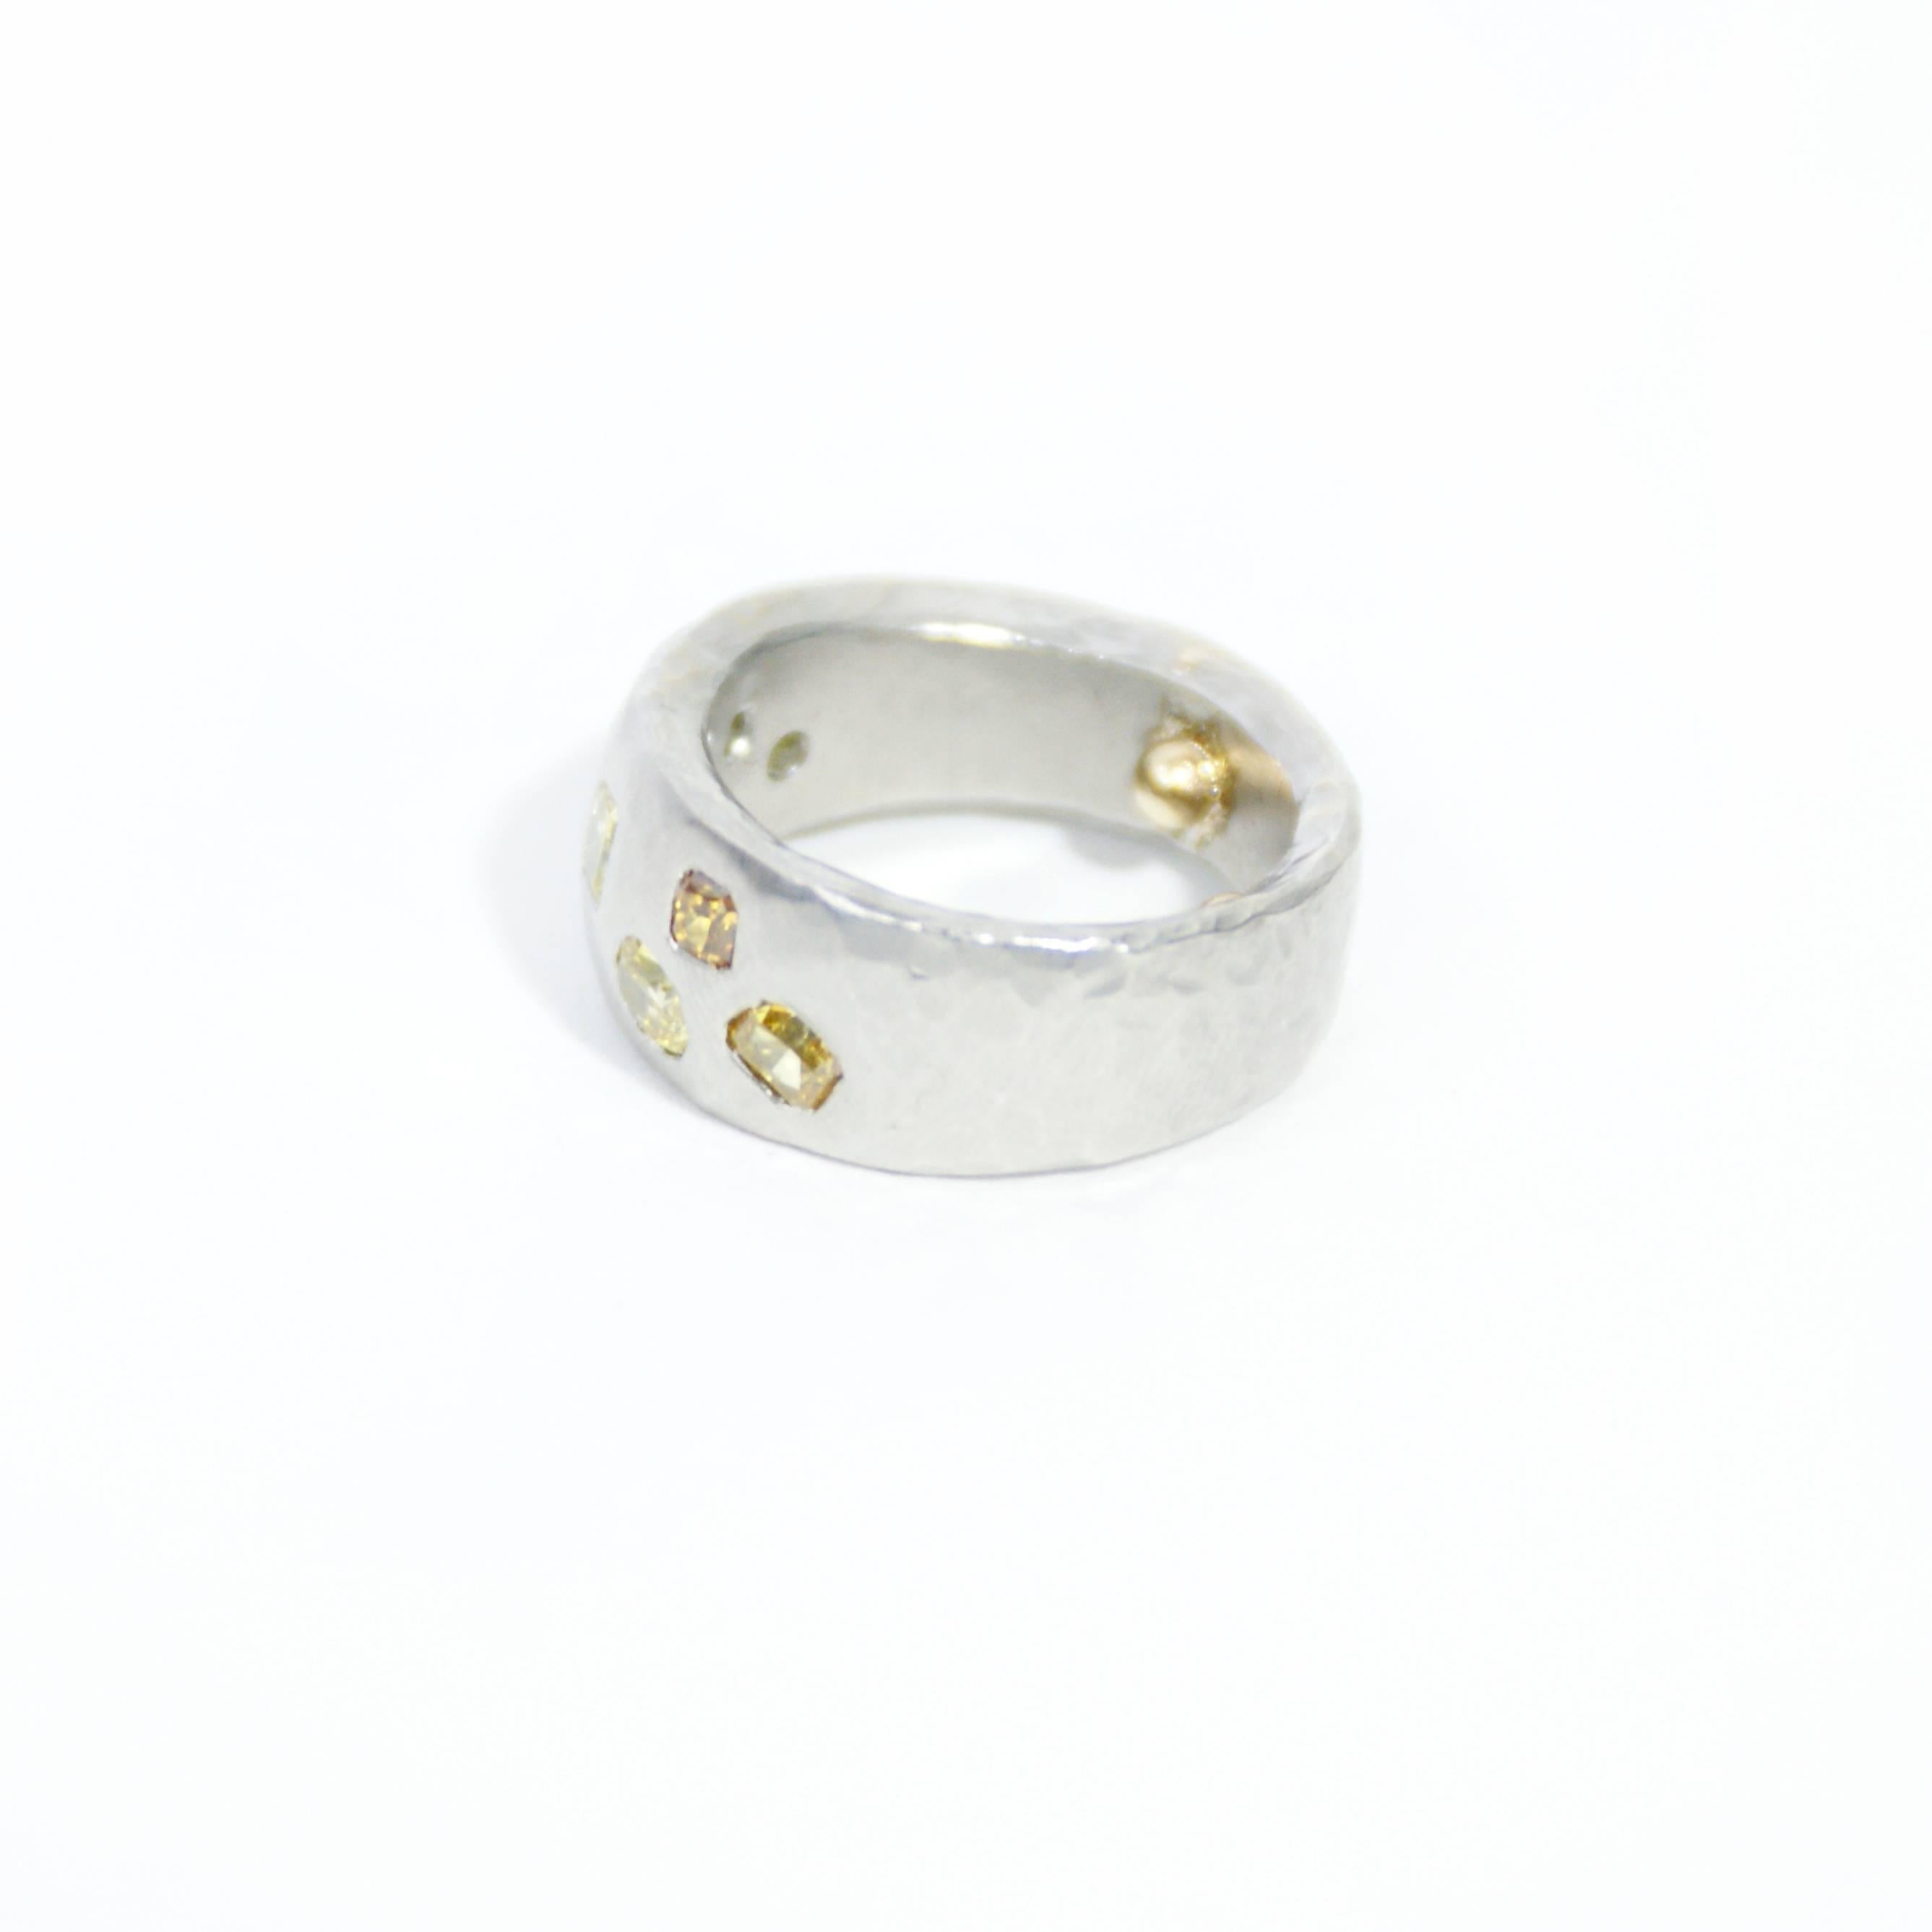 Insurance Appraisal as of January 20, 2016:

One platinum diamond band.  Stamped with the English hallmark of Platinum mad in London, The platinum band is set with seven yellow diamonds.  The band has a hammered finish and measures 7.30 mm-10.10 mm